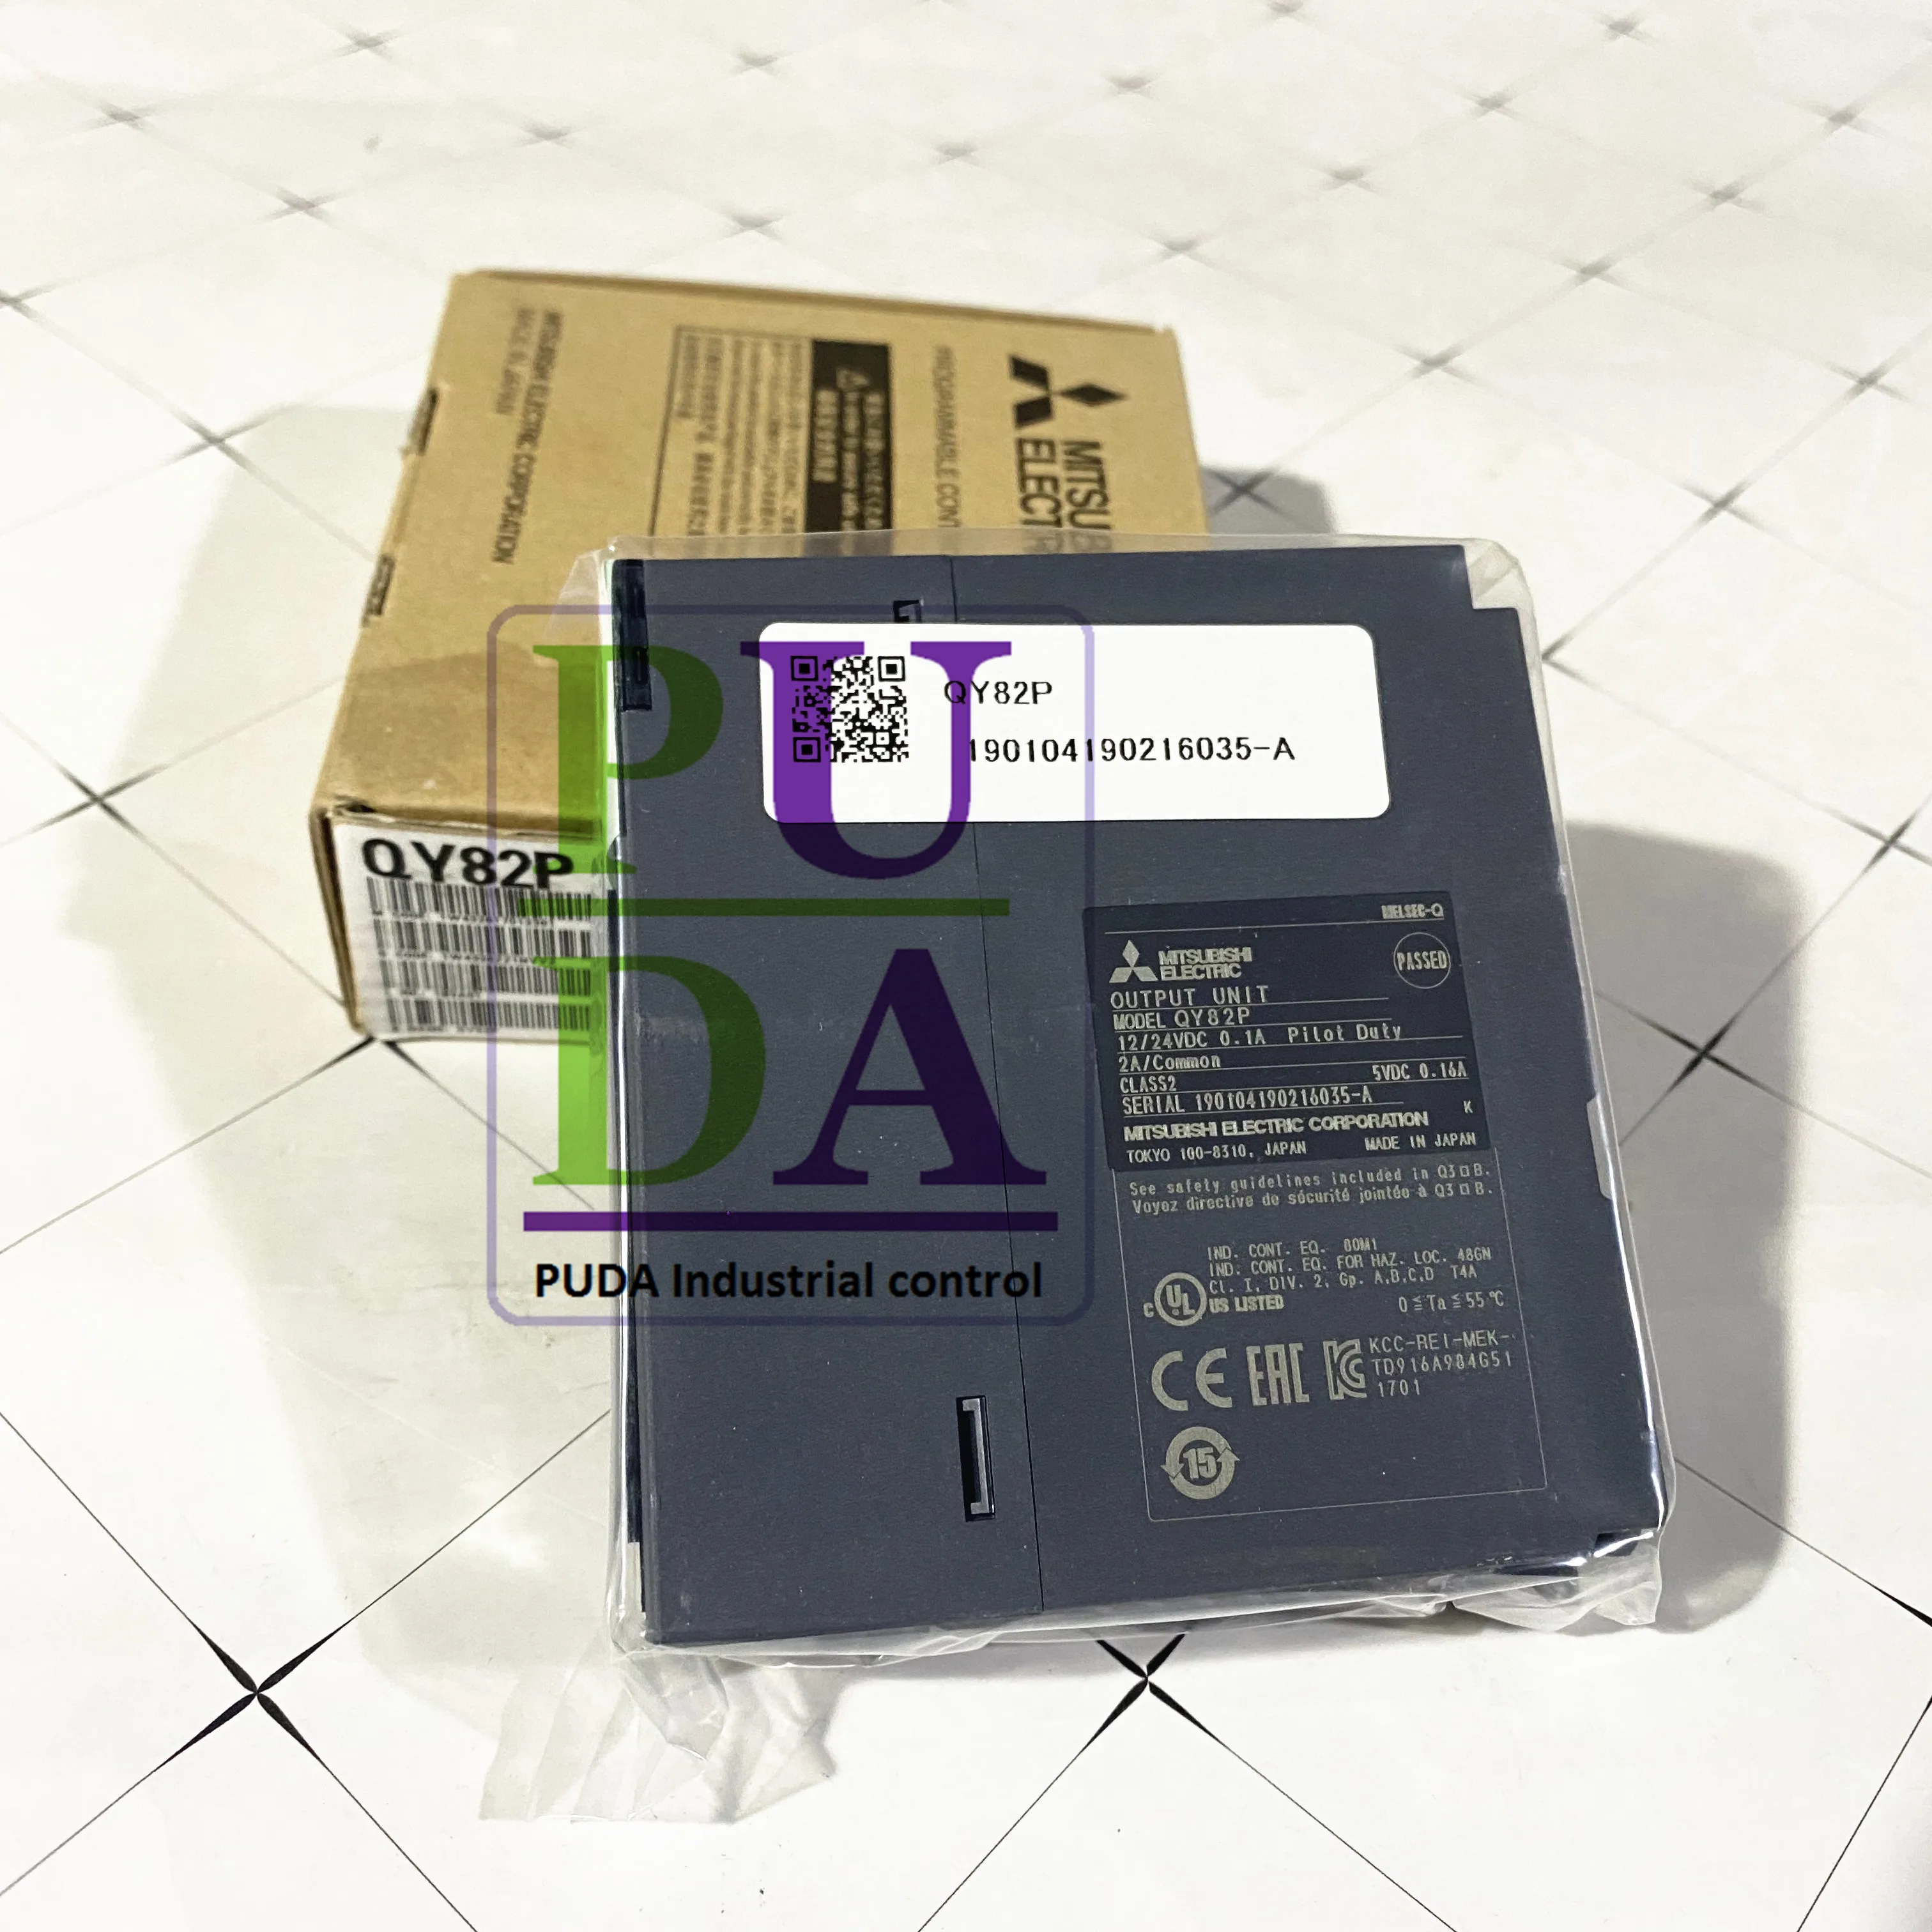 Spot Goods For New Original Mitsubishi Q Series Plc Module Qy82p Warranty 1  Year Best Price Qy82p - Buy Mitsubishi Q Series,Qy82p,Mitsubishi Qy82p  Product on Alibaba.com